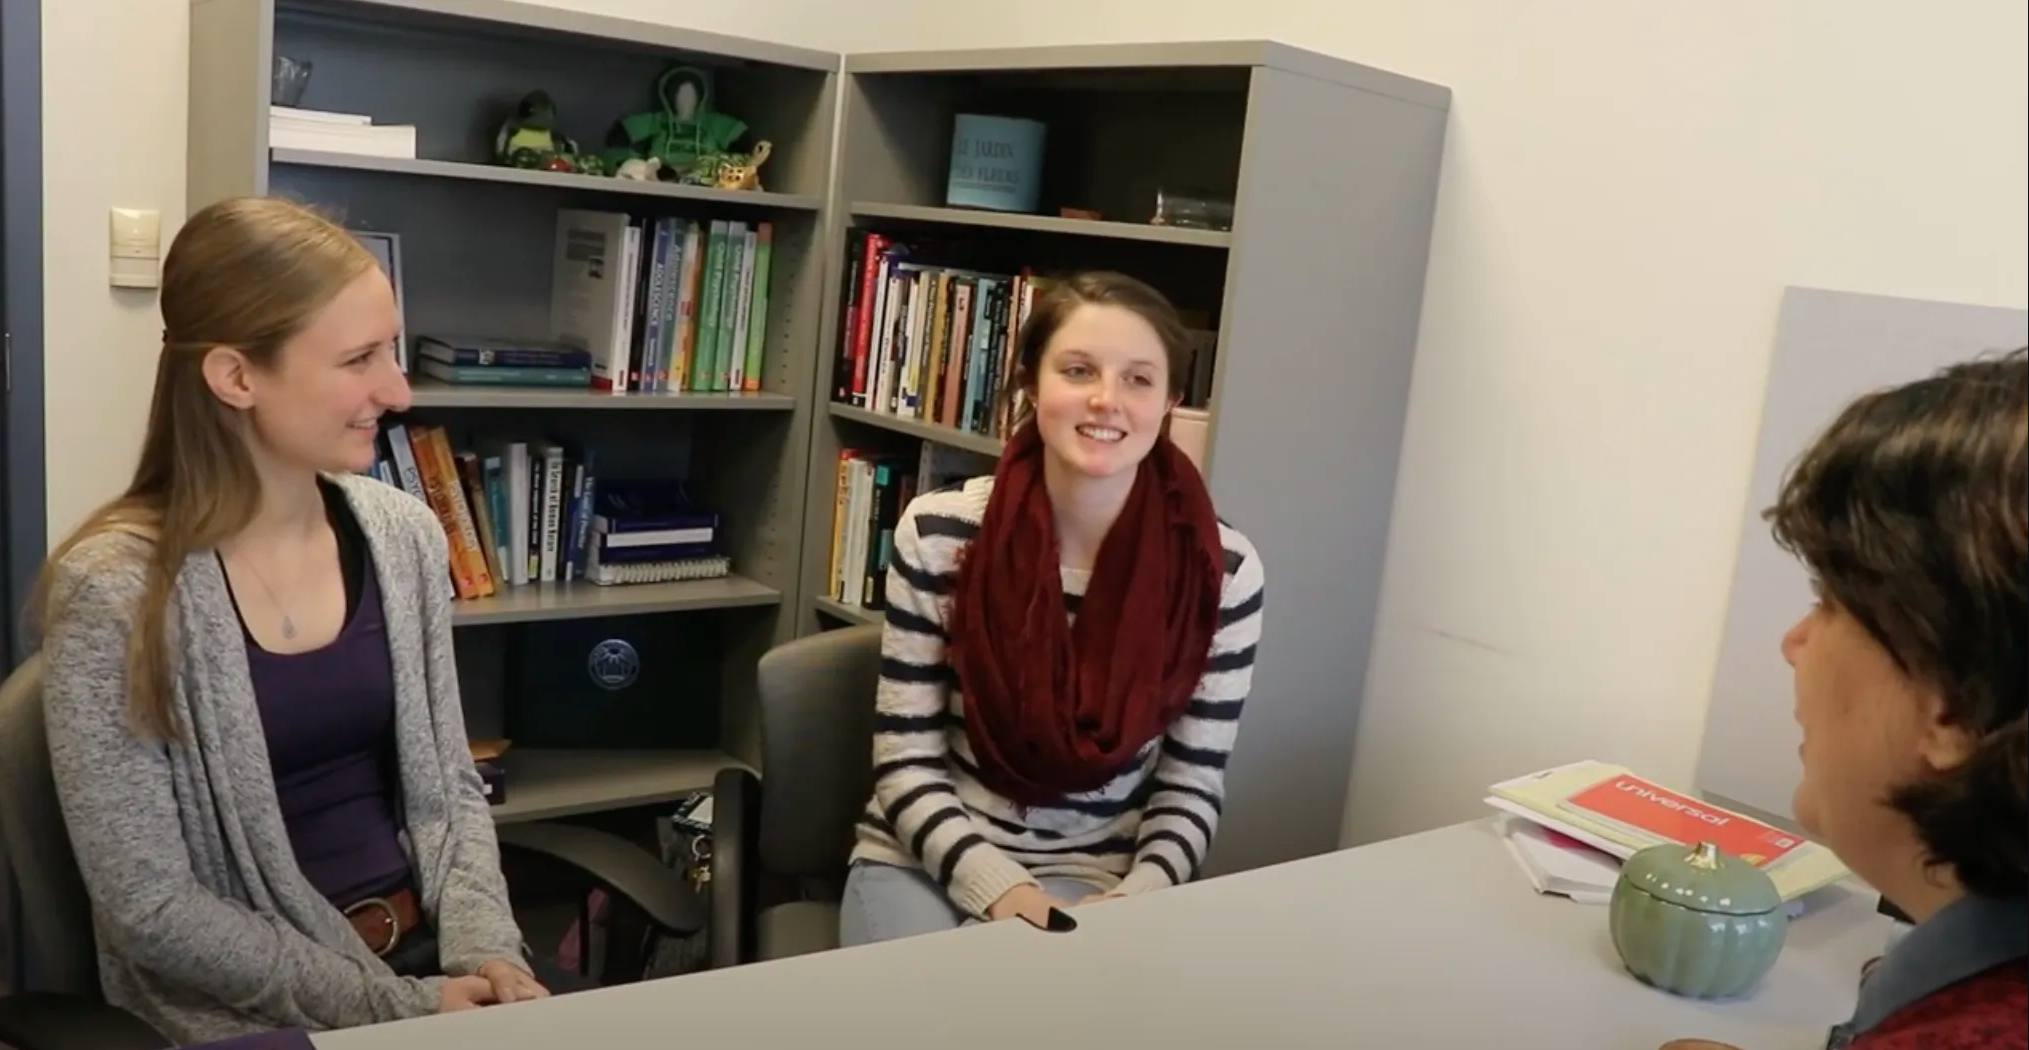 Two women, likely psychology majors, are seated and conversing with another person at a desk in an office. Shelves filled with books and items create a rich backdrop, adding to the academic atmosphere.